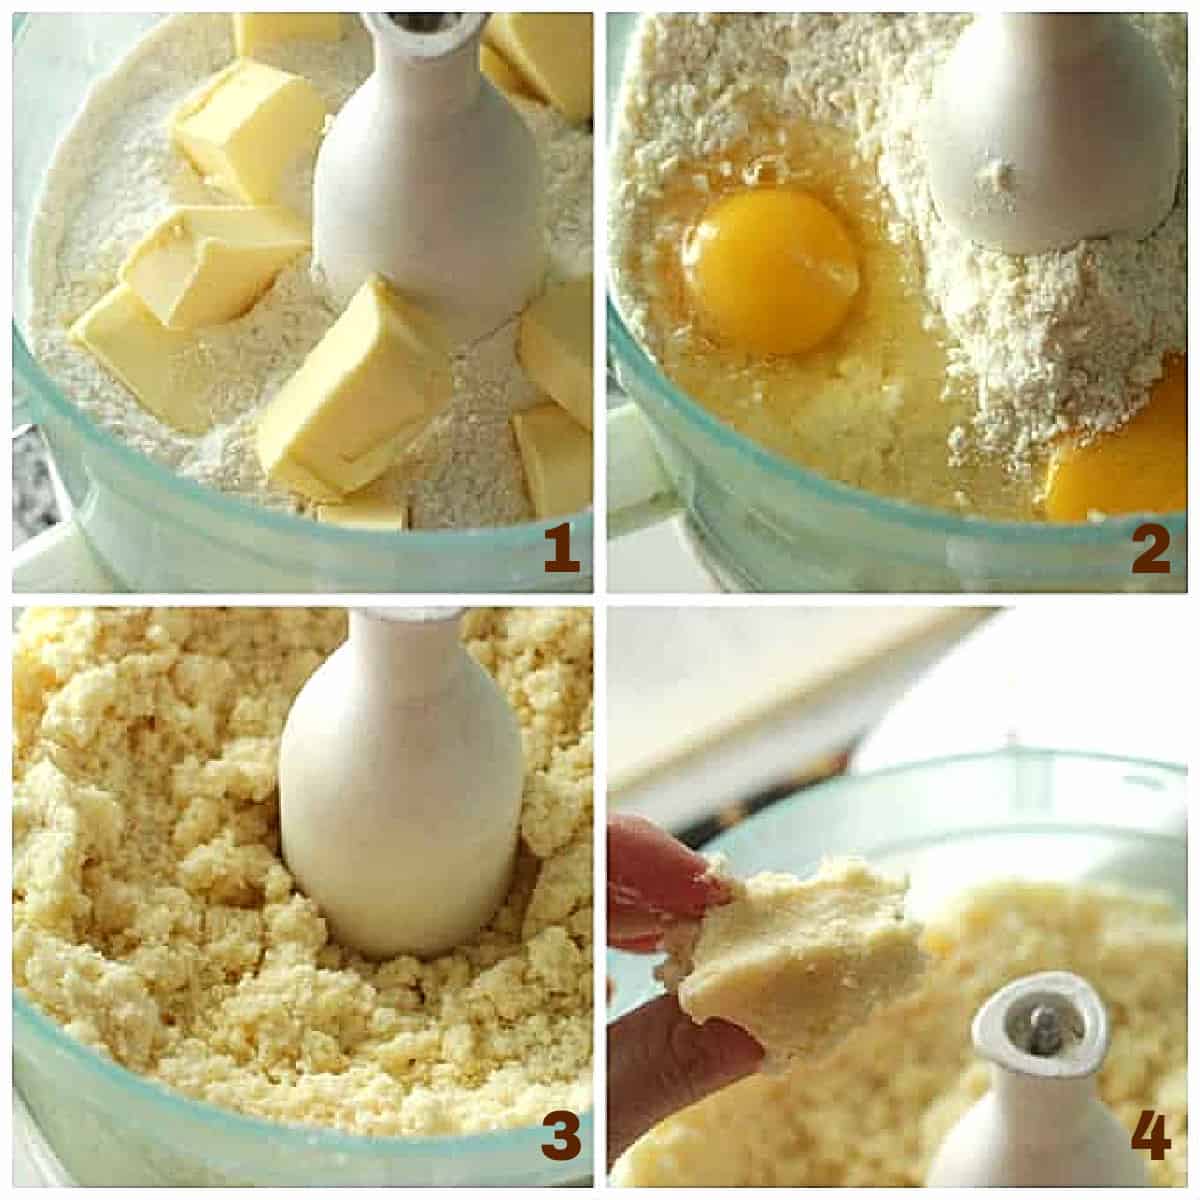 Image collage showing bowl of food processor with dry ingredients, butter, eggs and processed mixture